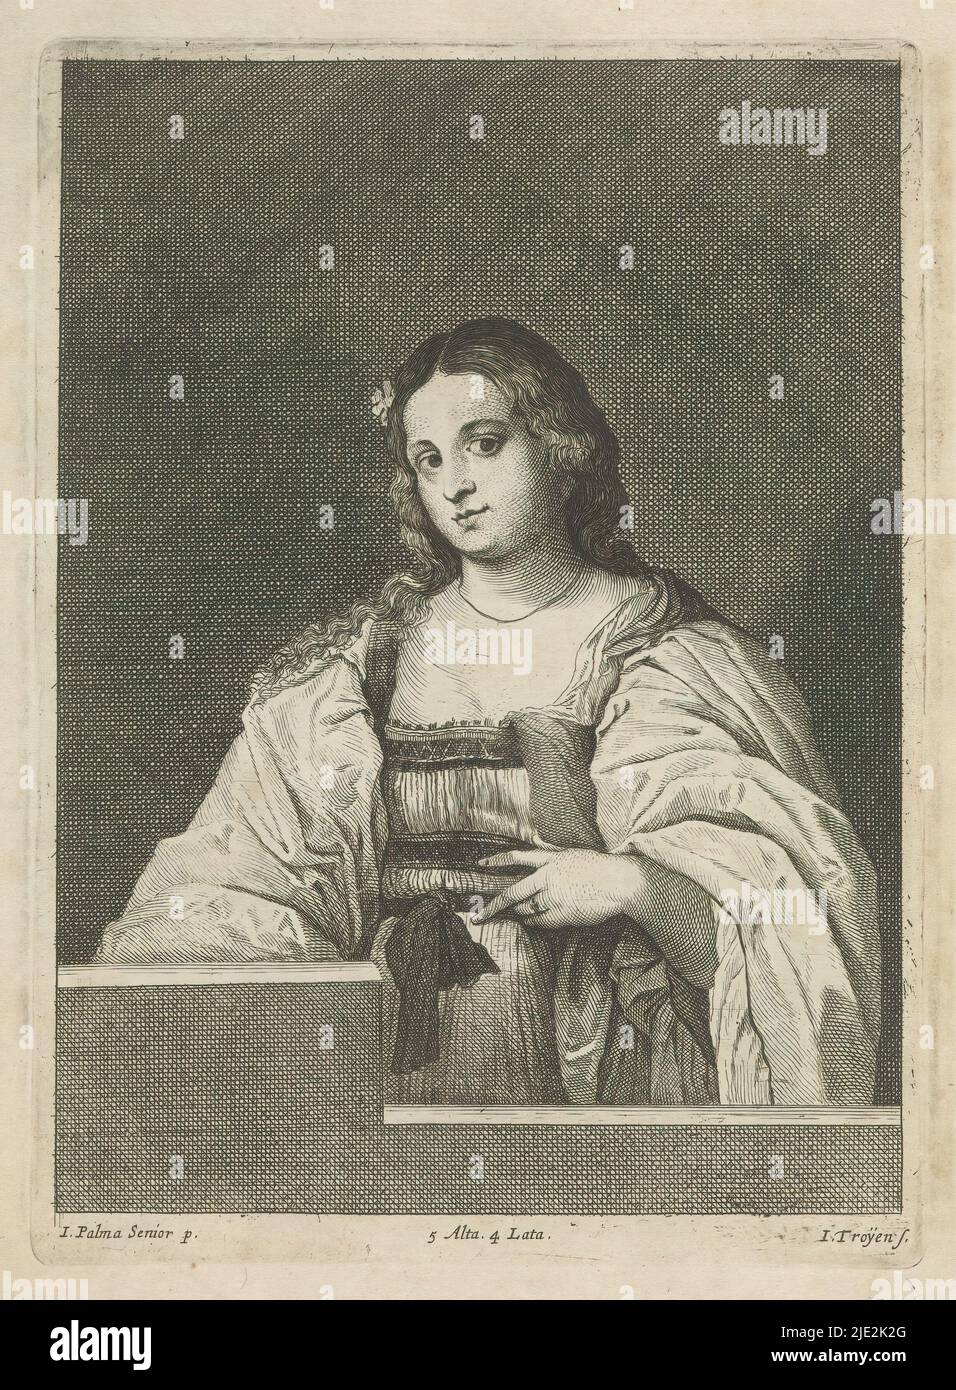 Portrait of an unknown woman, She is standing behind a low wall. This print is part of an album., print maker: Jan van Troyen, (mentioned on object), after painting by: Jacopo Palma (il Vecchio), (rejected attribution), after painting by: Giovanni Cariani, (possibly), print maker: Southern Netherlands, (possibly), after painting by: Italy, after painting by: Italy, publisher: Brussels, 1660, paper, etching, engraving, height 230 mm × width 167 mm Stock Photo